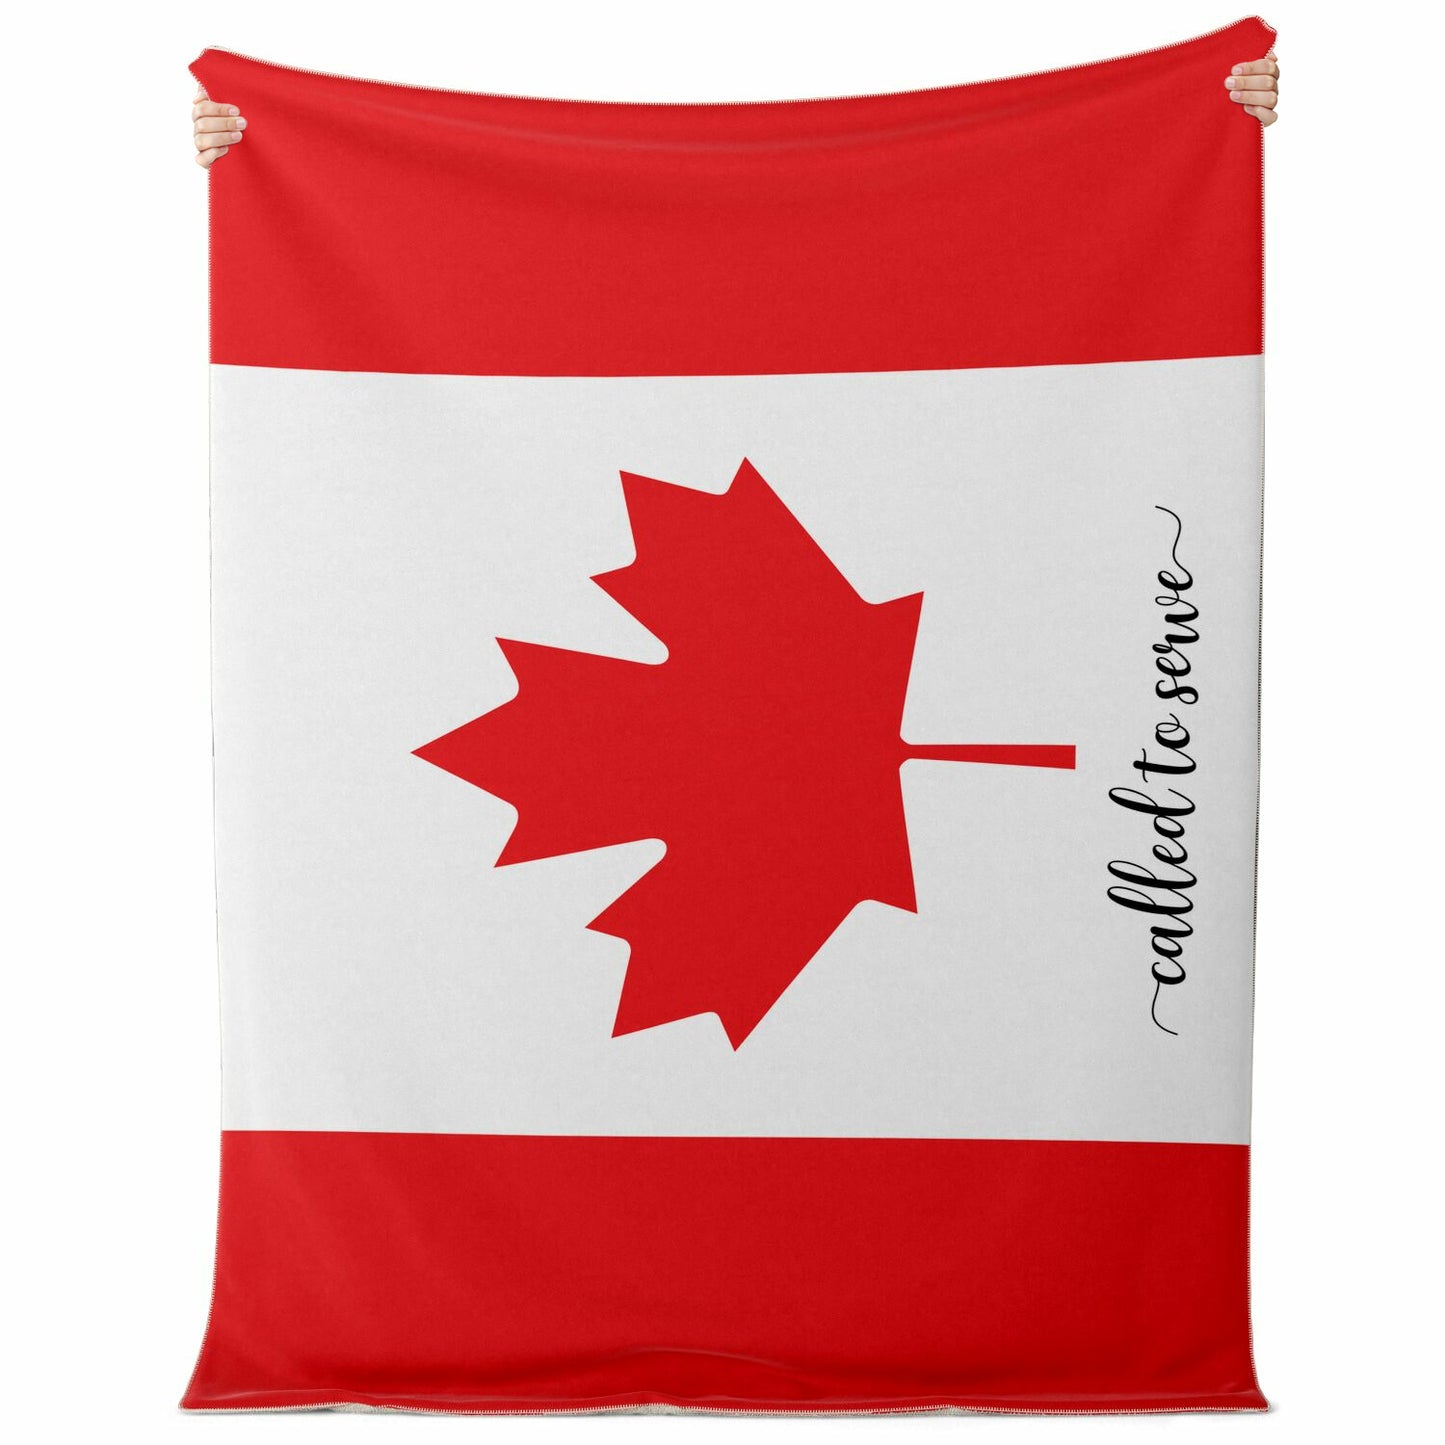 CANADA Called to Serve Blanket